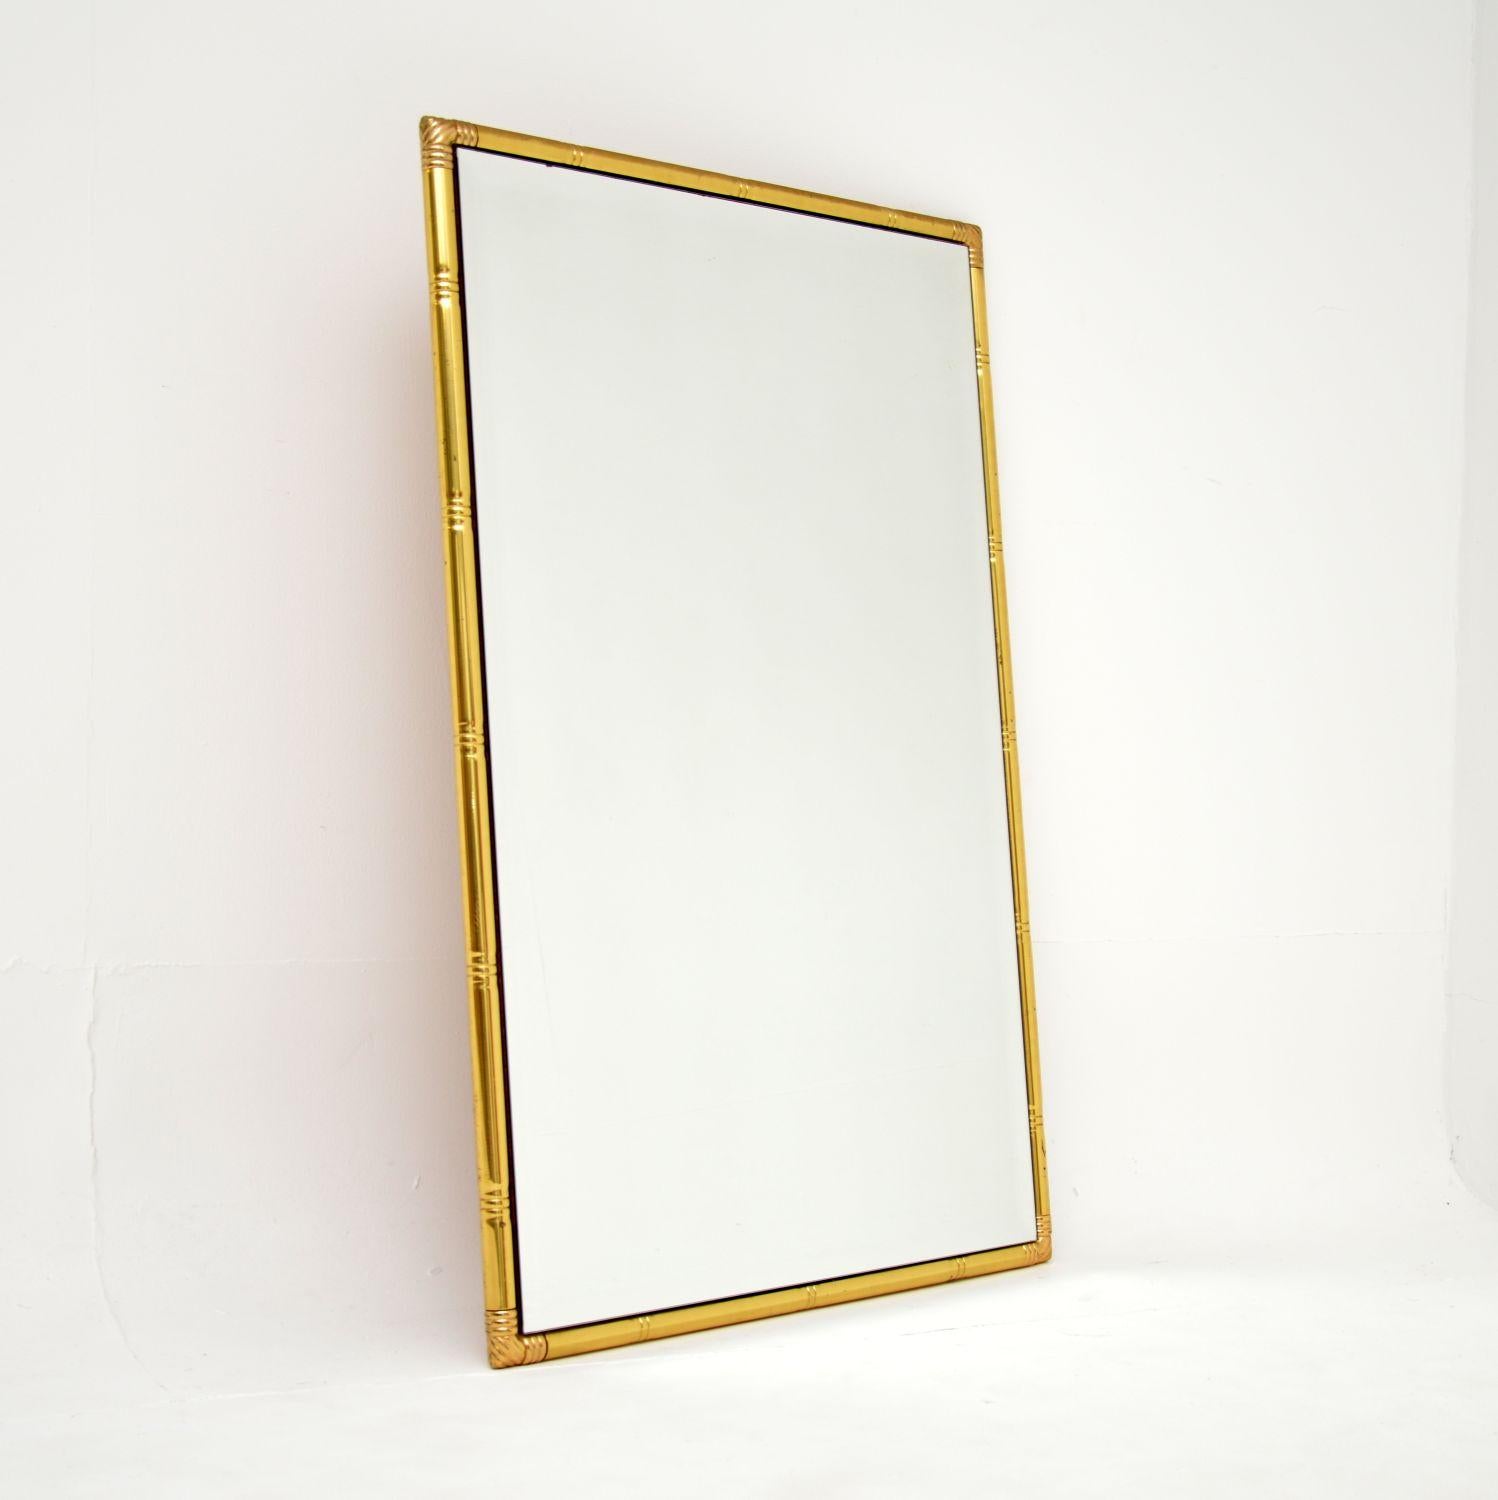 A stylish and extremely well made vintage faux bamboo mirror in solid brass. This was made in England, it dates from the 1970’s.

It is of superb quality, the brass frame is beautifully crafted and is very strong.

The condition is excellent for its